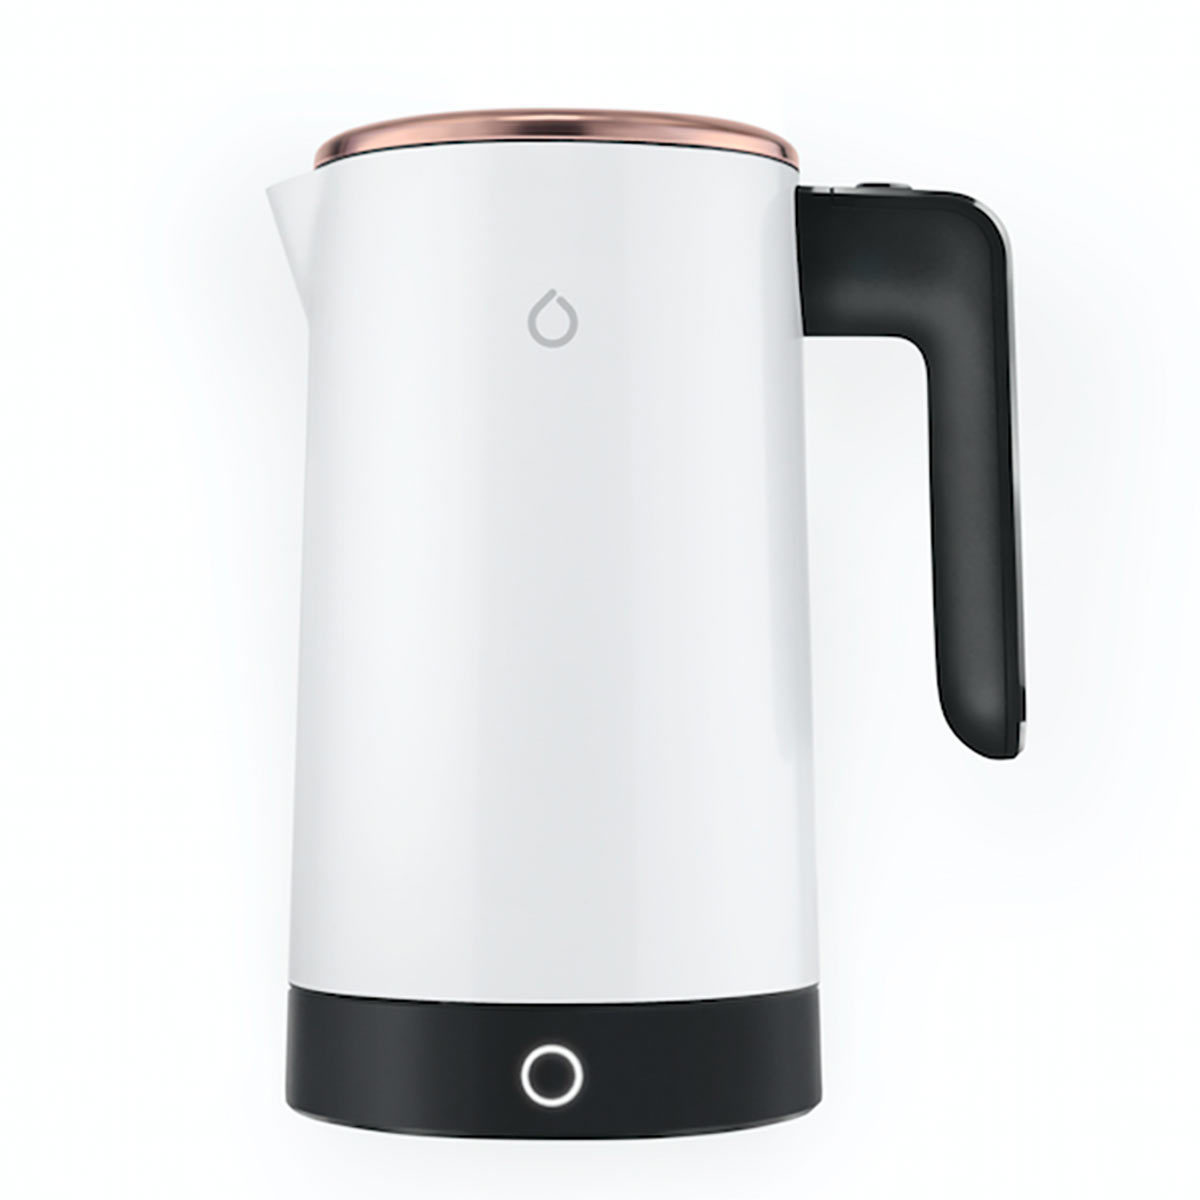 Smarter iKettle Wi-Fi Controlled Kettle in White & Rose Gold